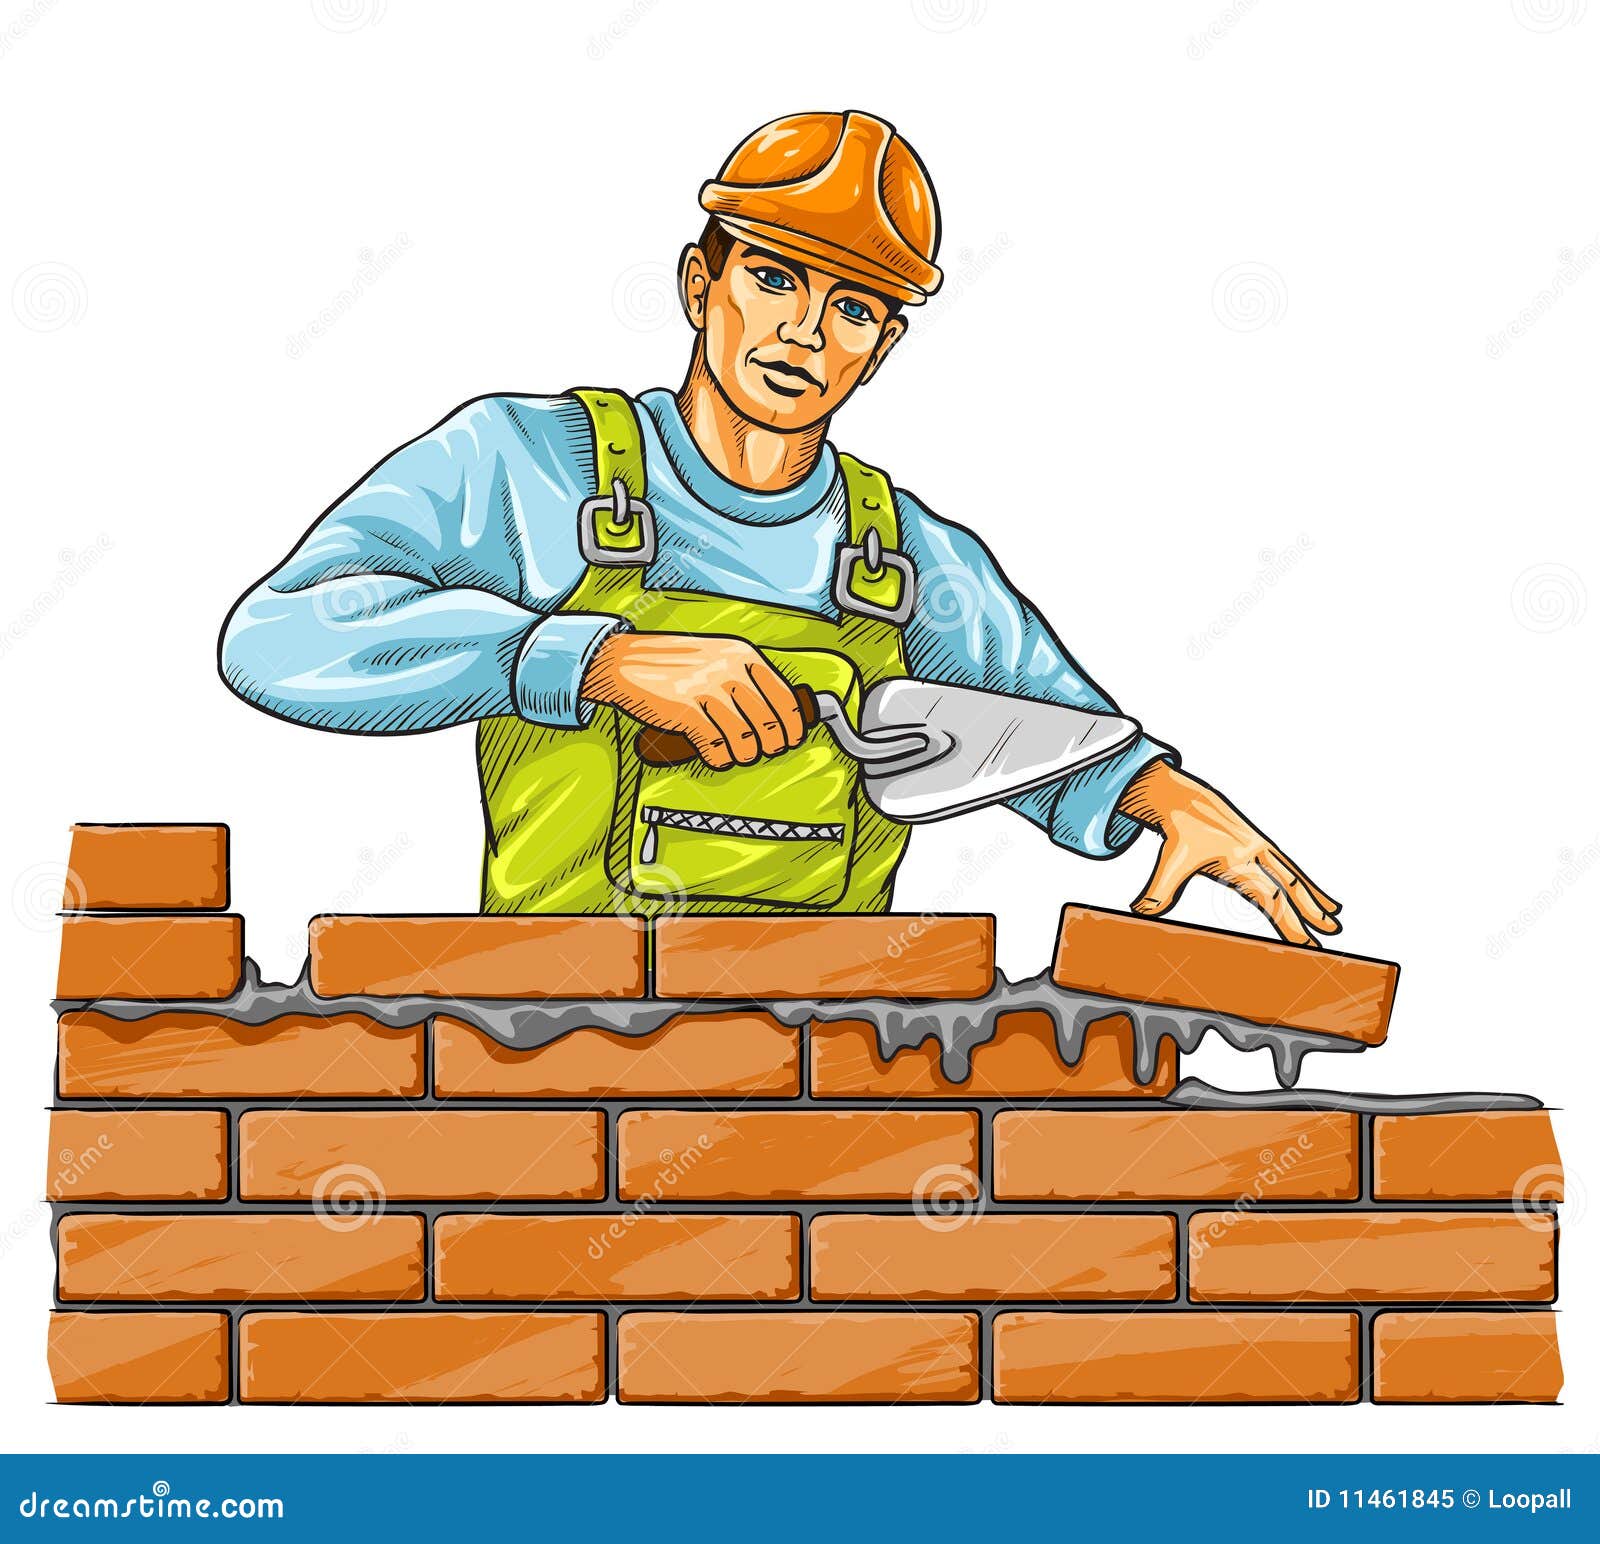 man painting house clipart - photo #39